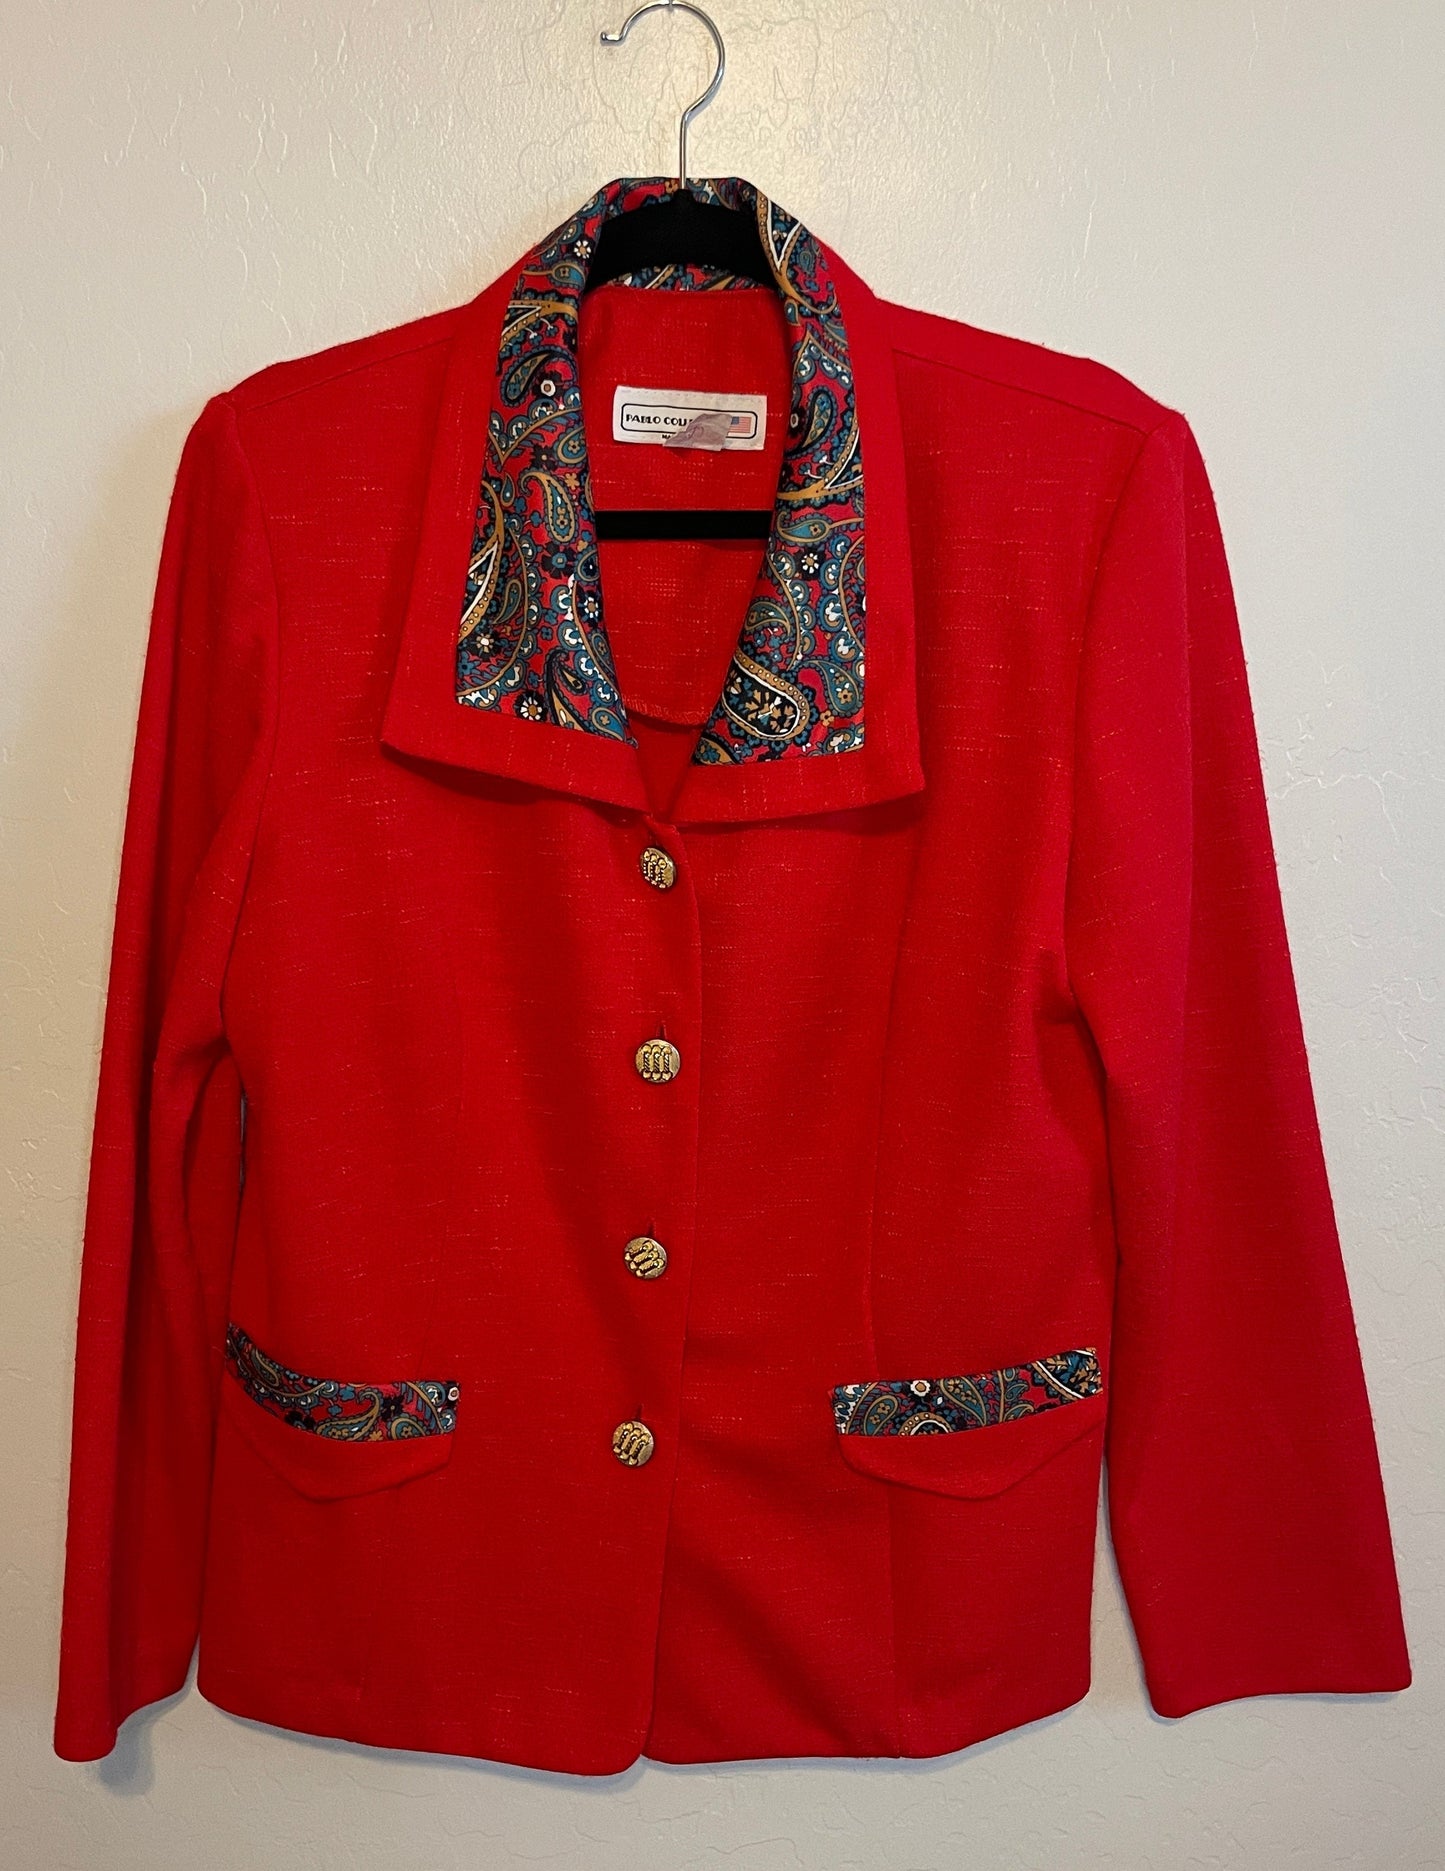 Vintage Red Blazer with Paisley Detailing